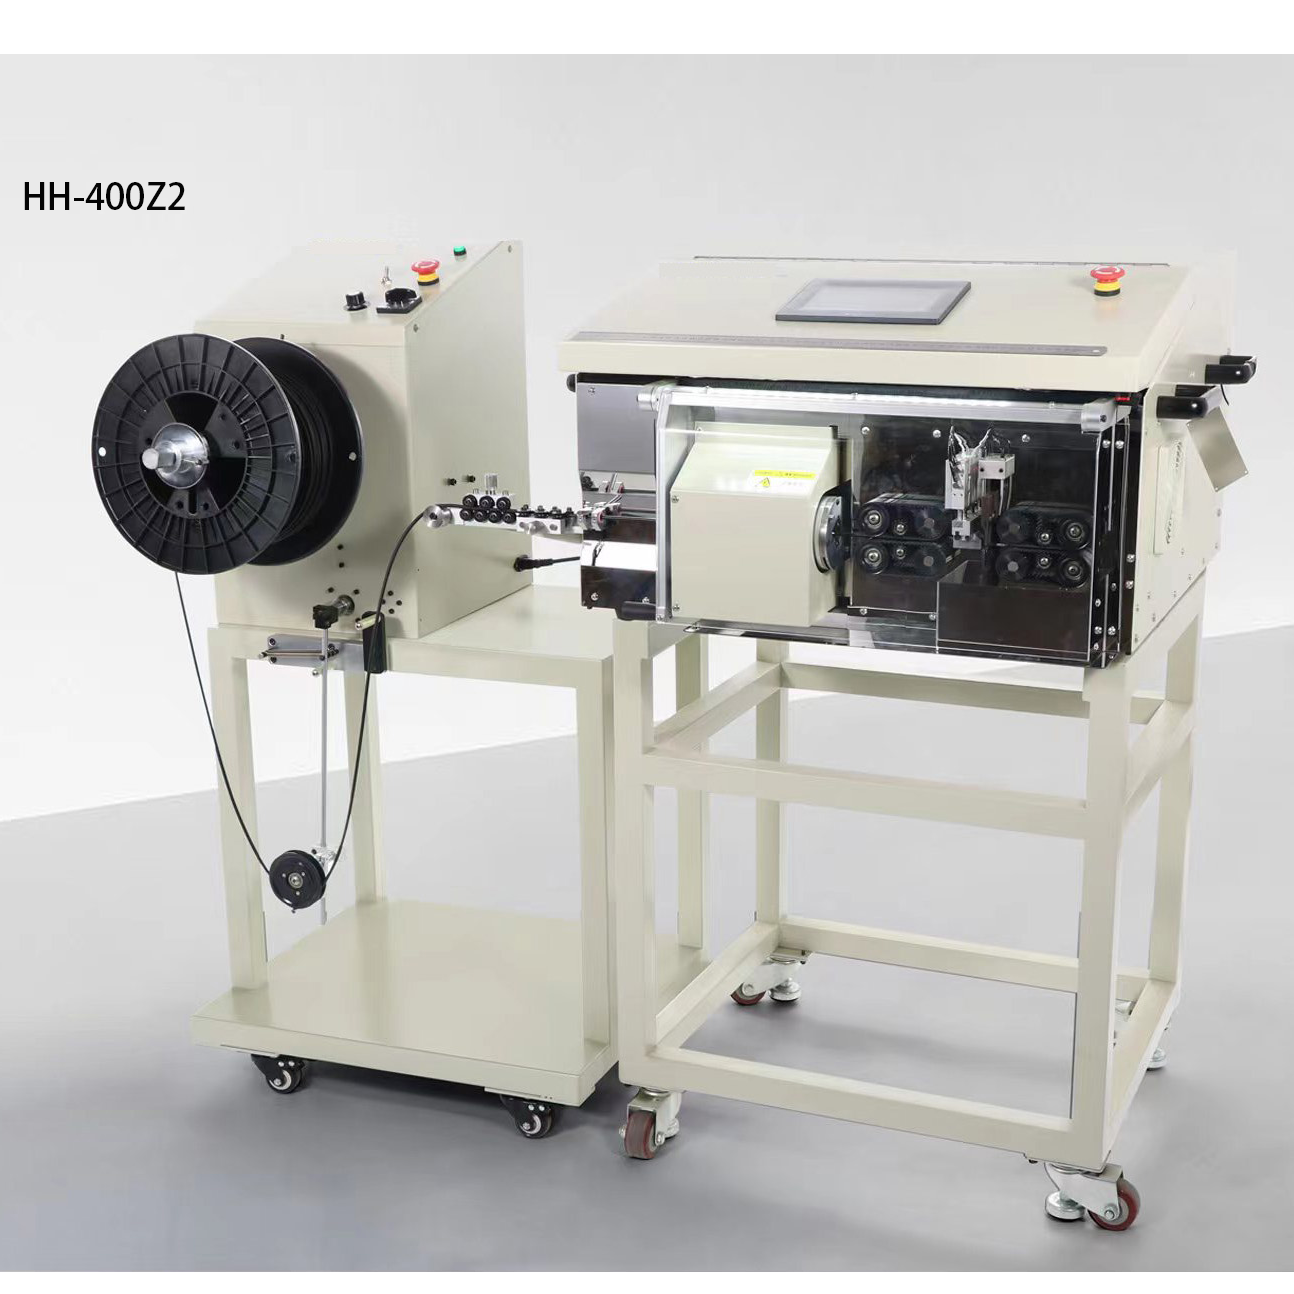 HH-400Z1/Z2 Fully-automatic Cut and Strip Machine for Coaxial Cable